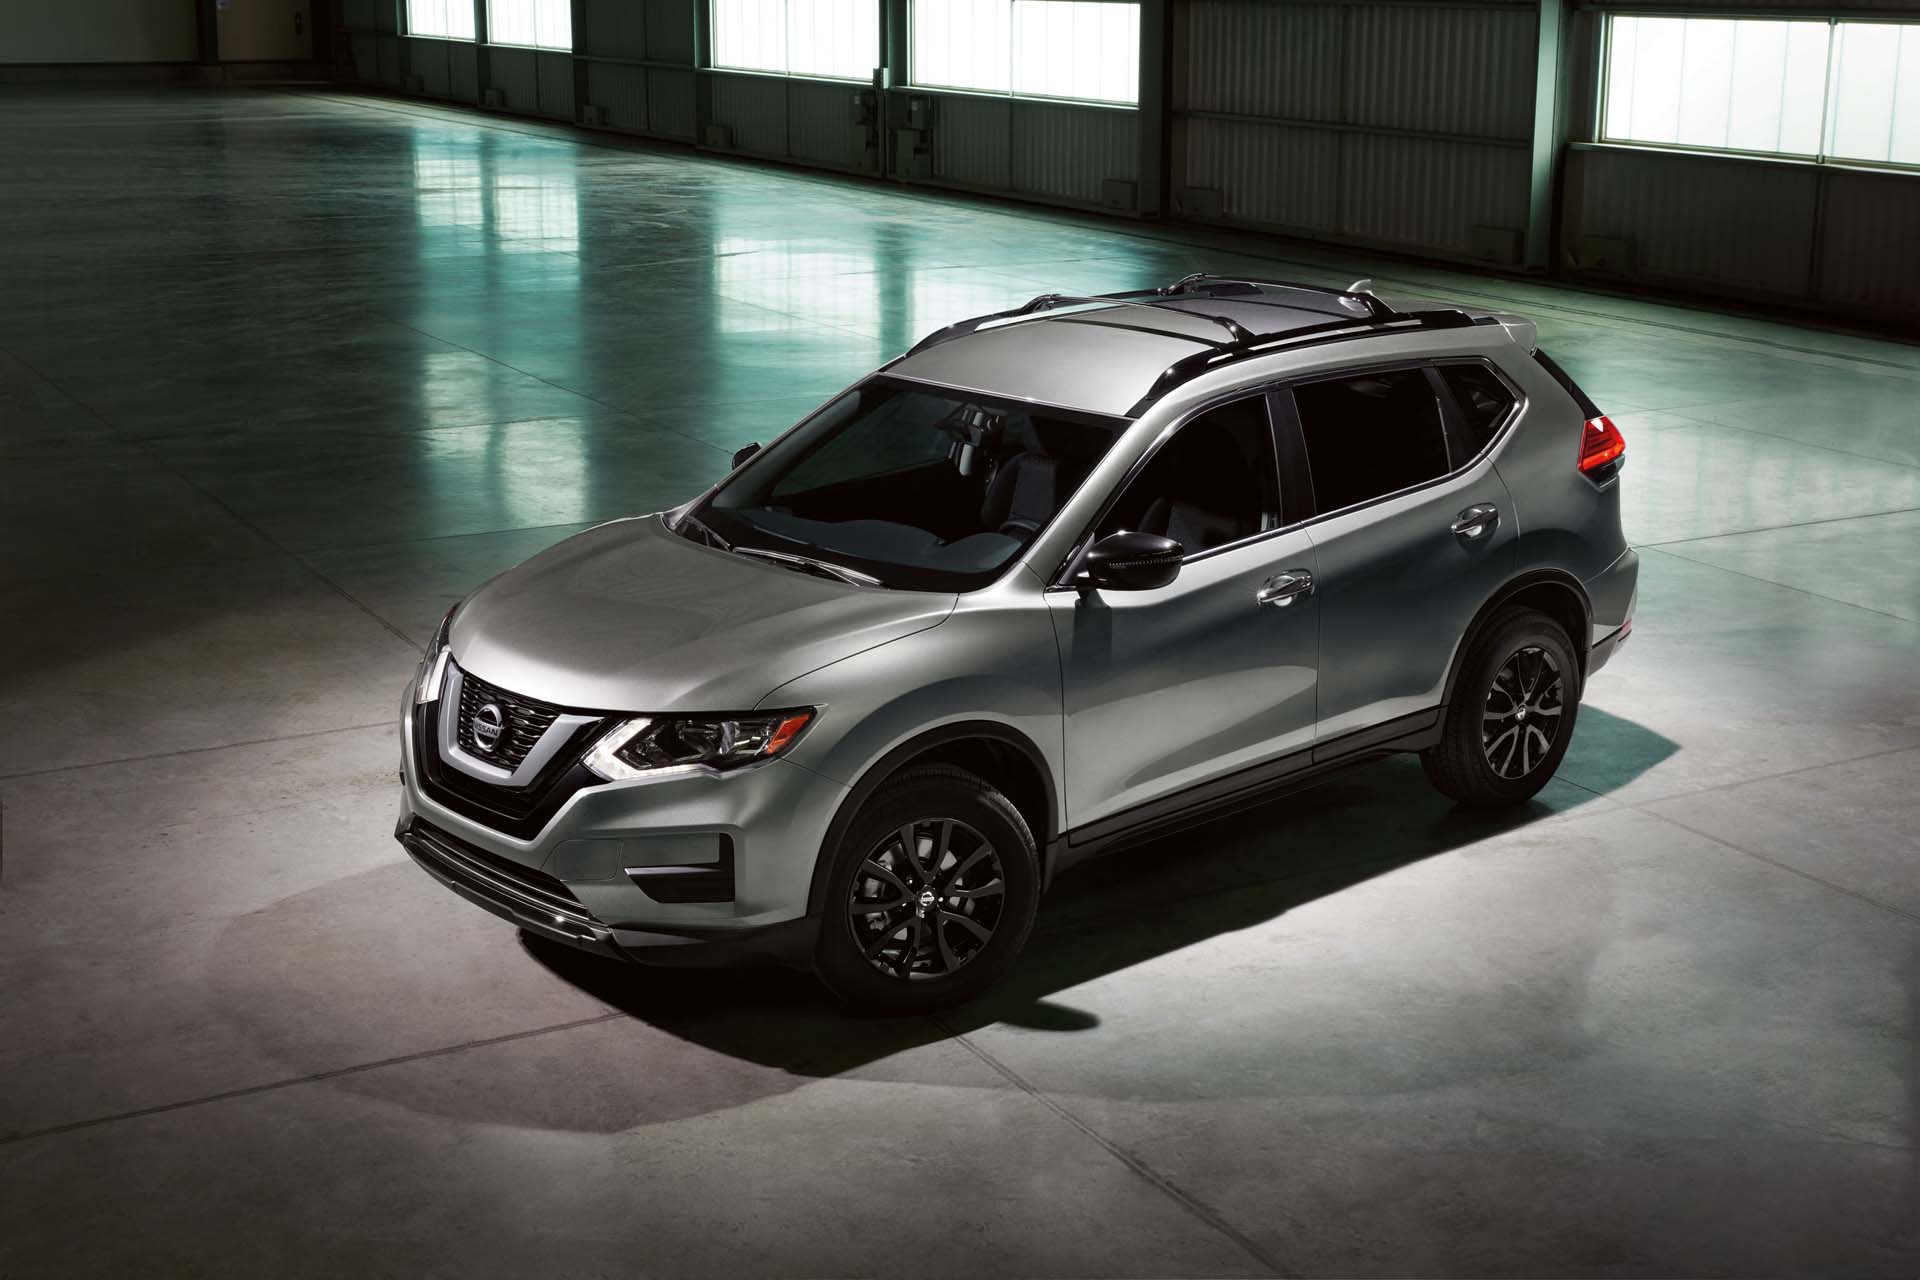 2017 Nissan Rogue Review Ratings Specs S And Photos The Car Connection